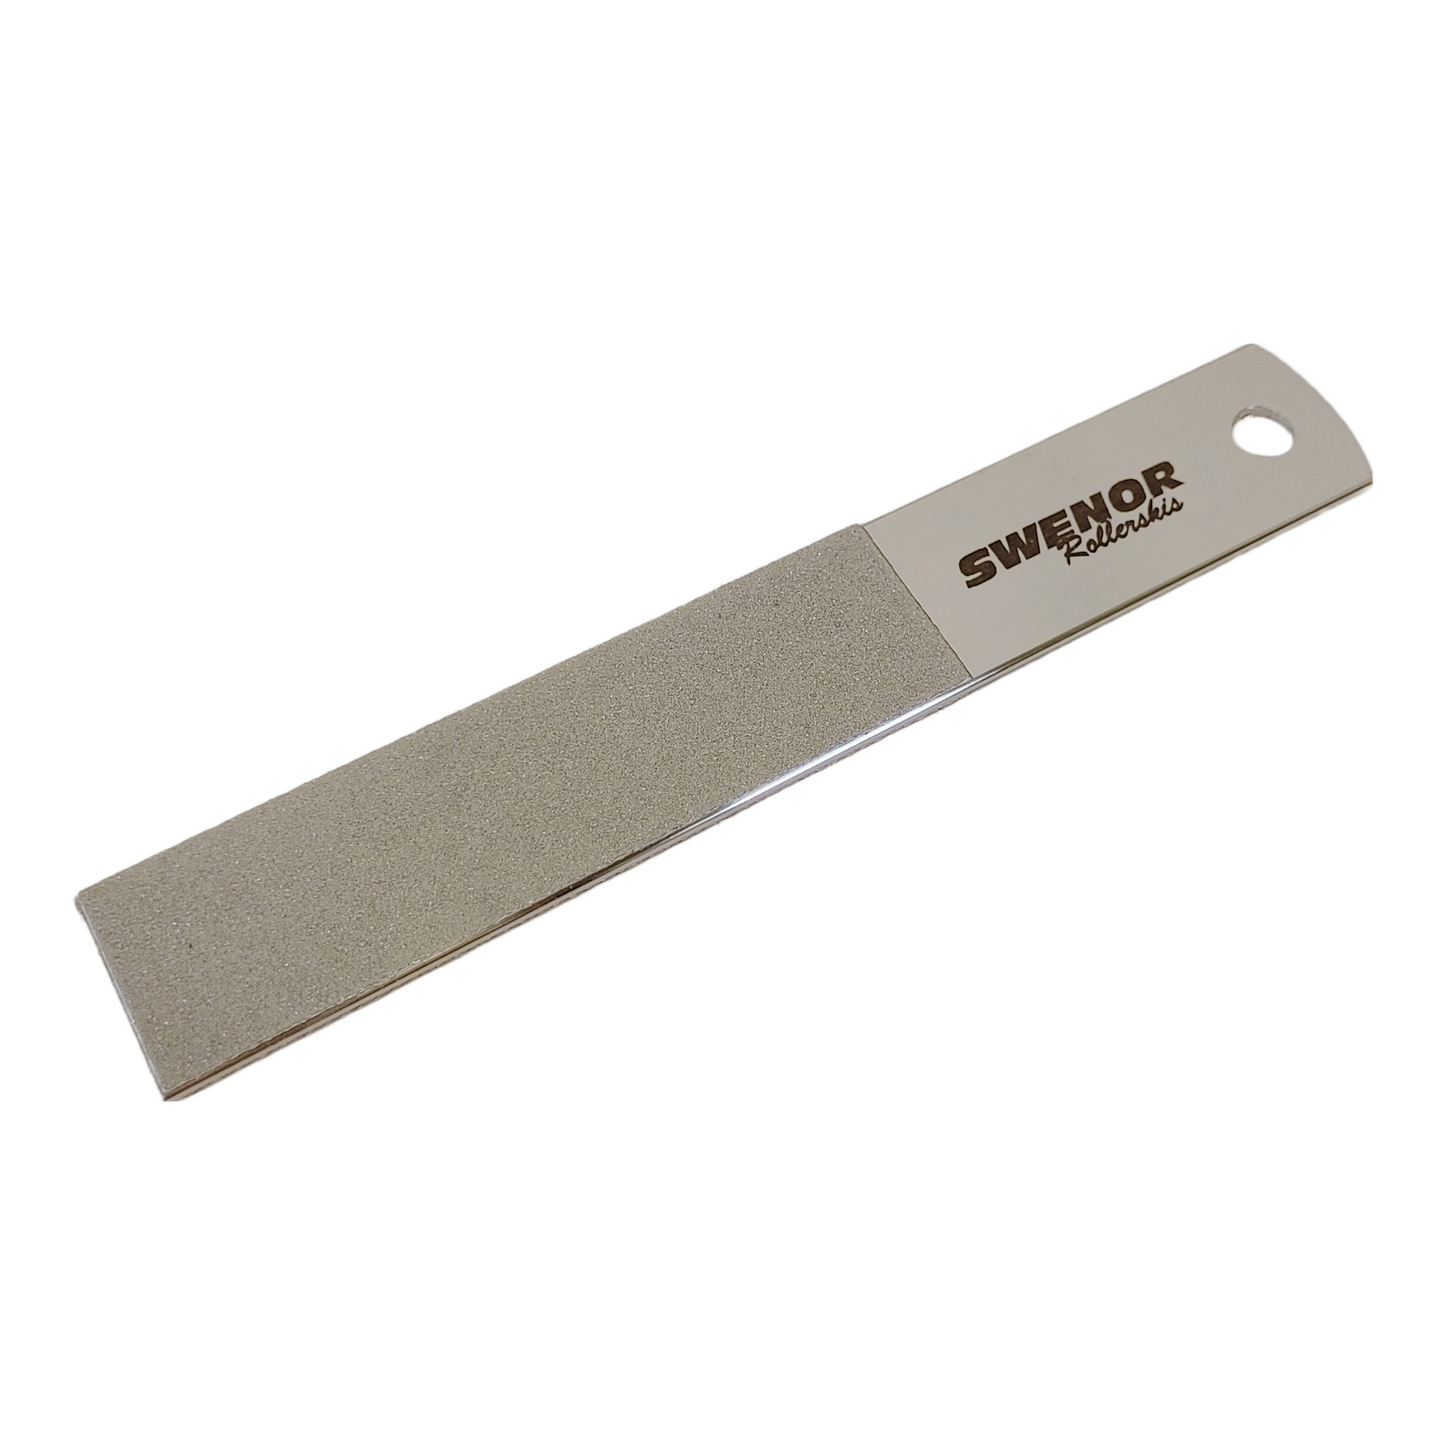 A product picture of the Swenor Rollerski Ferrule Sharpener